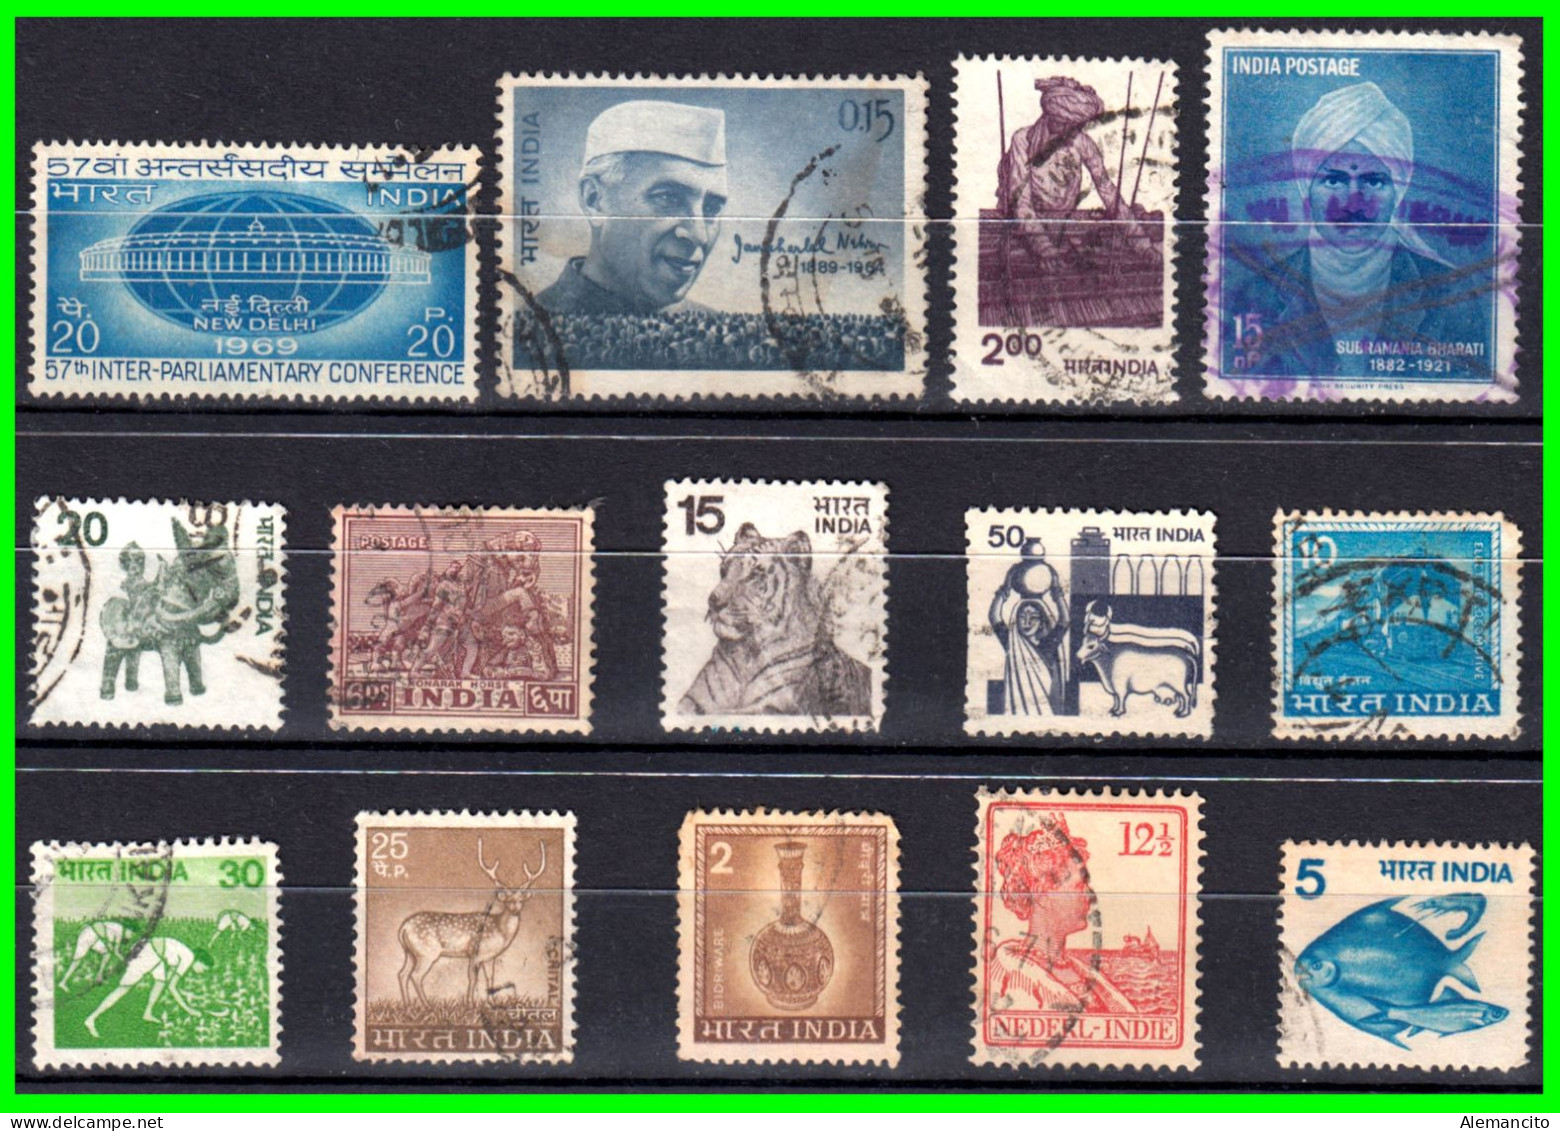 INDIA – ( ASIA ) – LOTE 14 SELLOS DIFERENTES AÑOS Y VALORES - Used Stamps